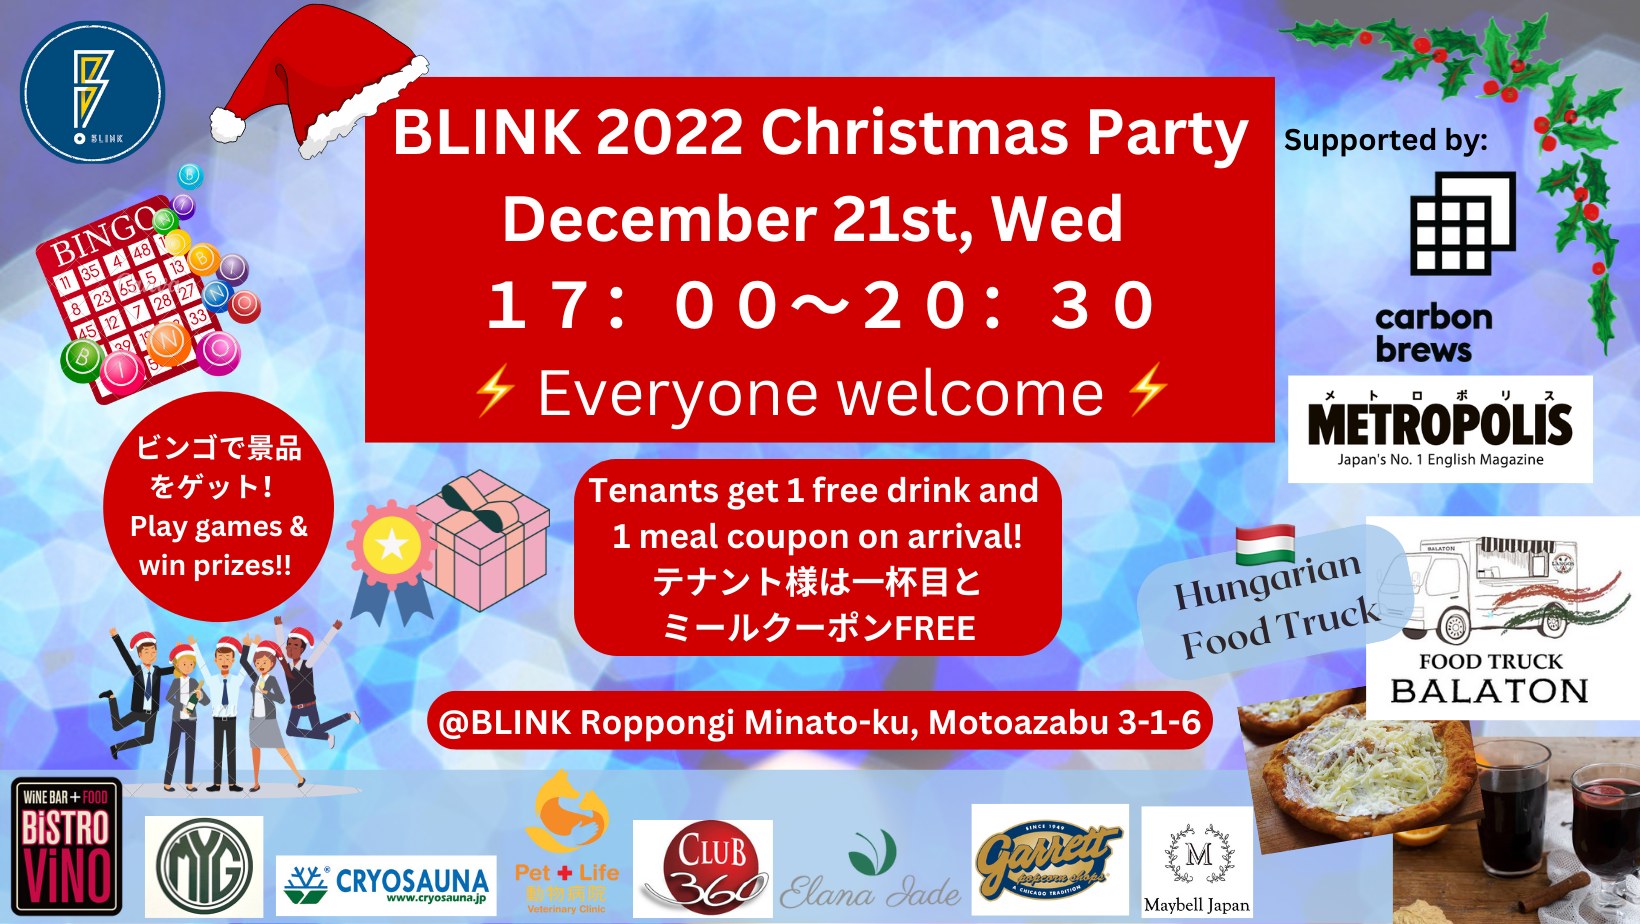 BLINK’s Annual Party